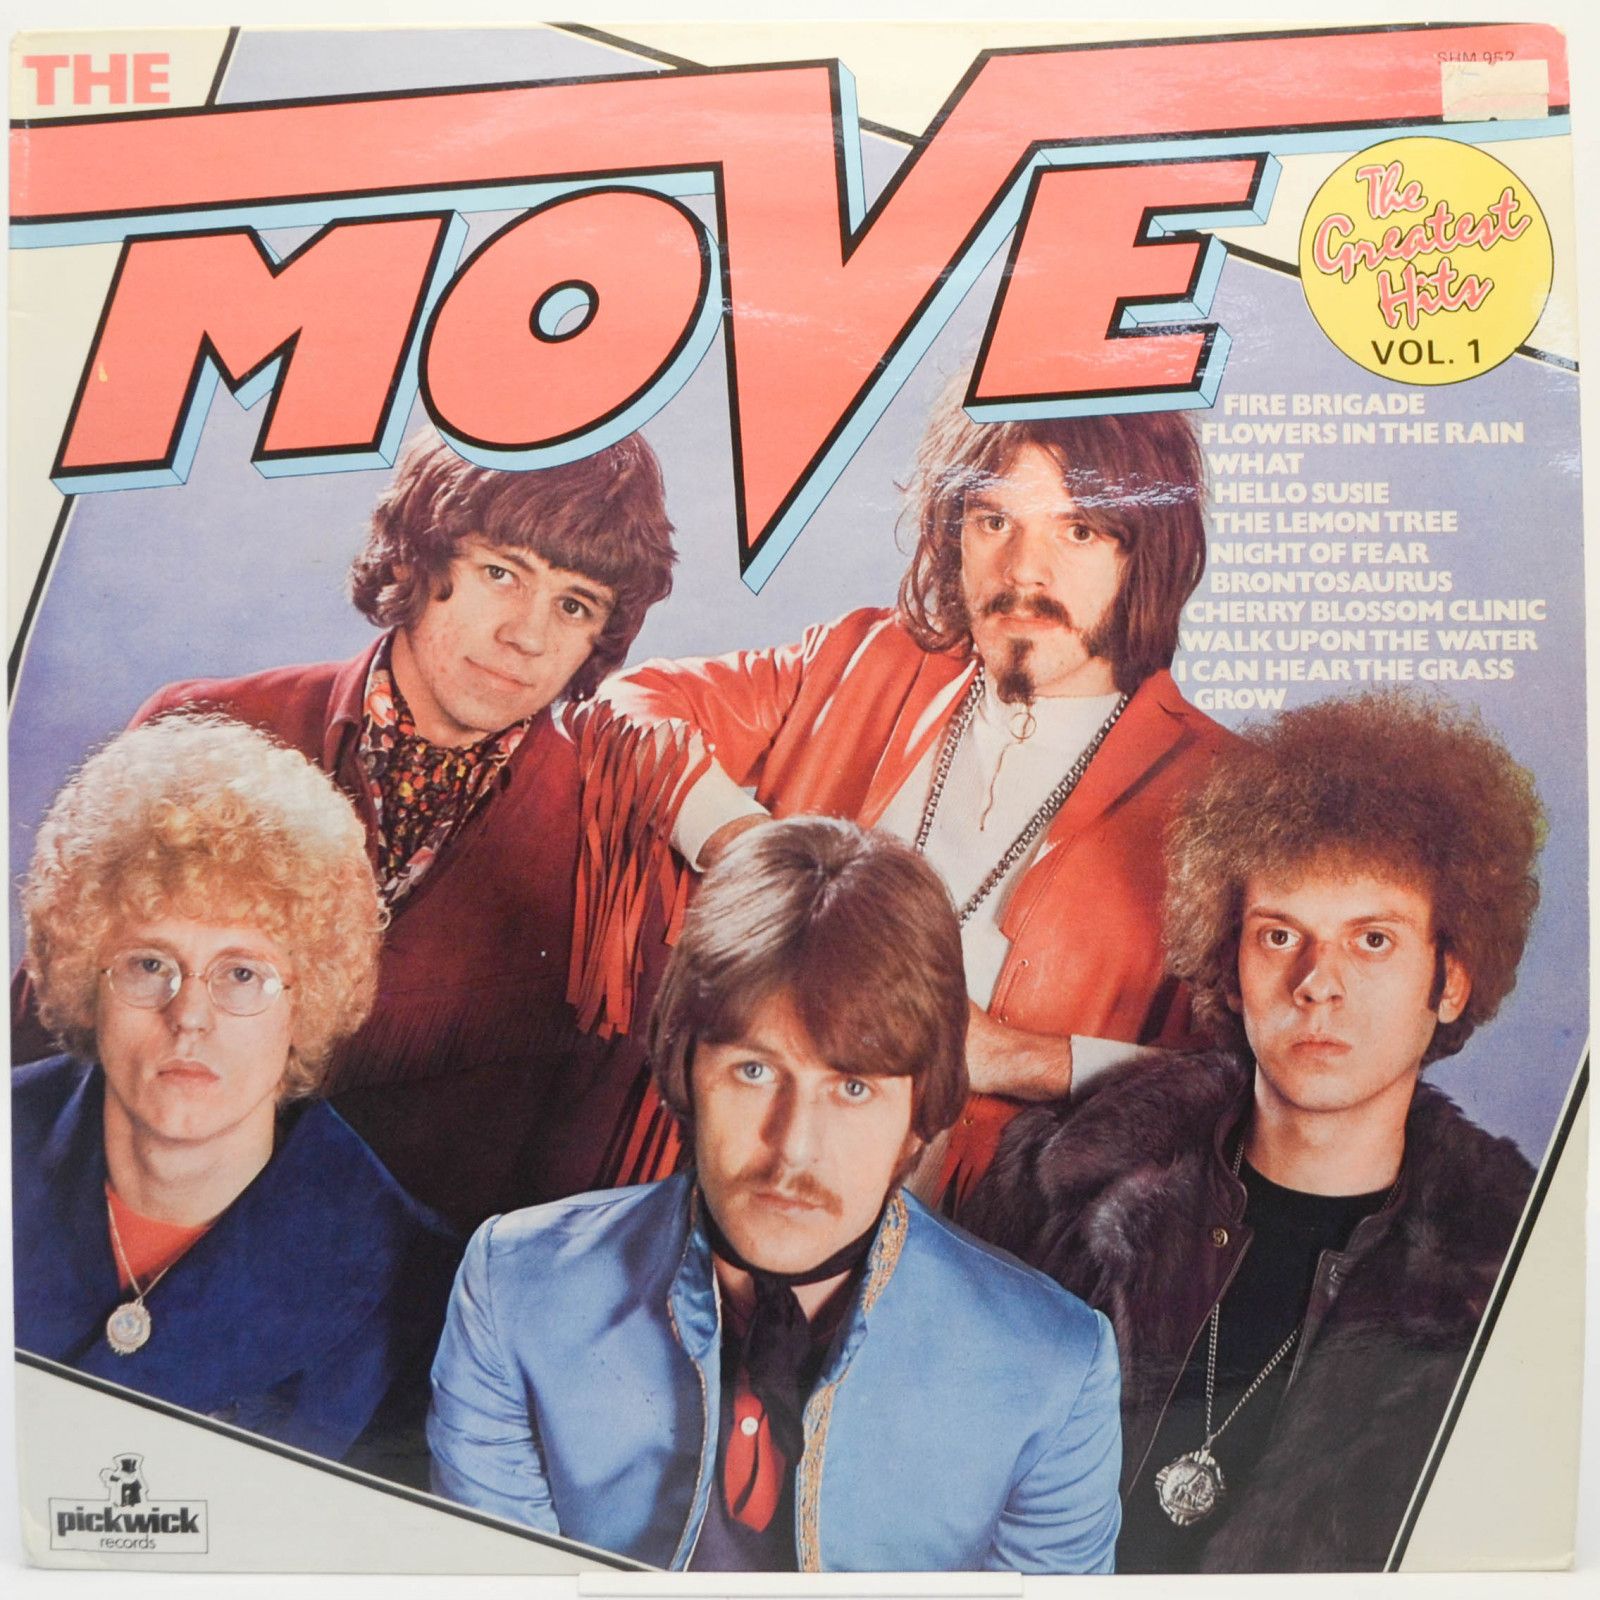 Move — The Greatest Hits Vol. 1 (UK), 1978